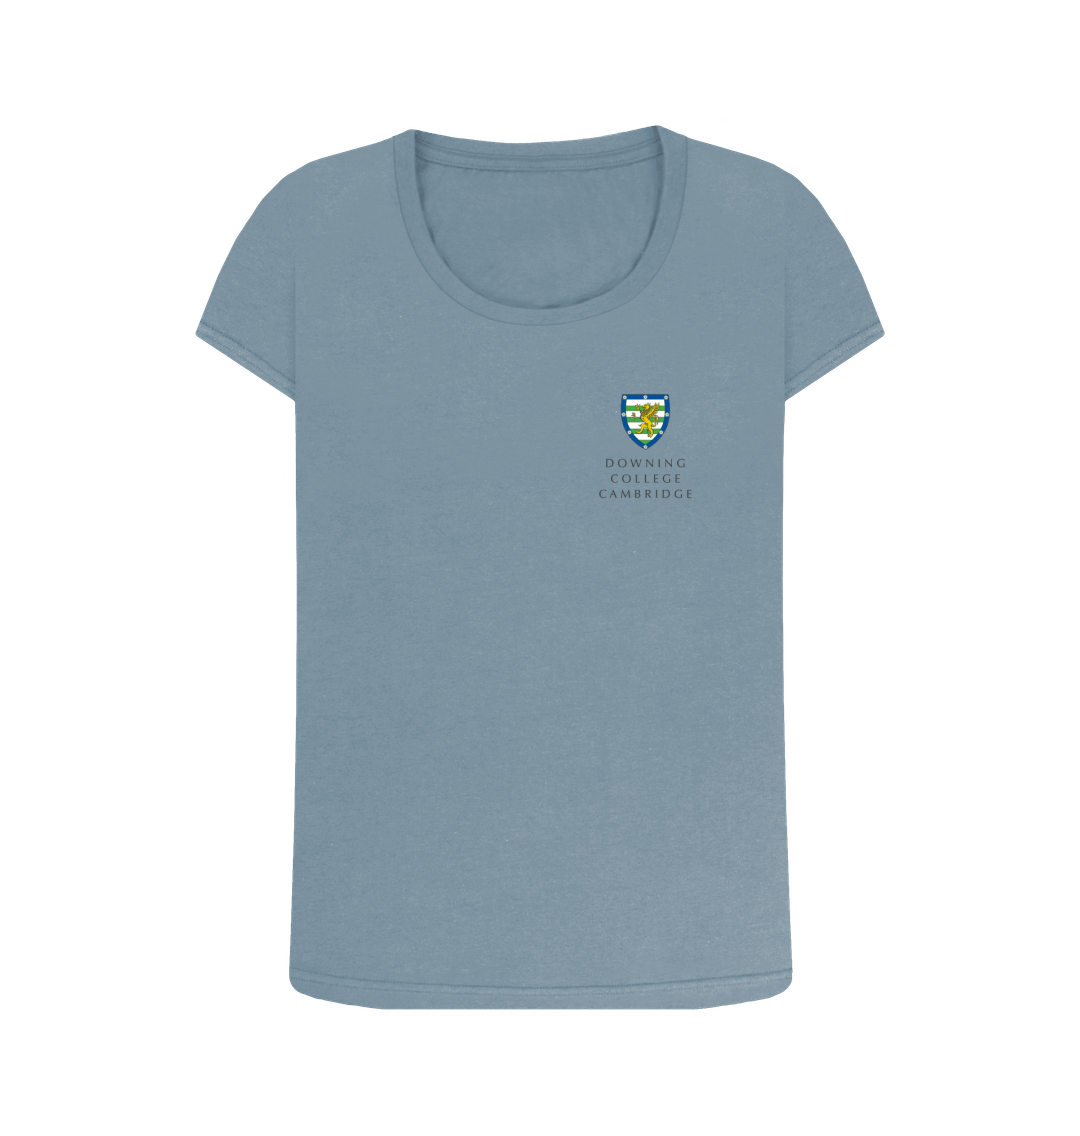 Stone Blue Downing College Women's Scoop Neck Tee